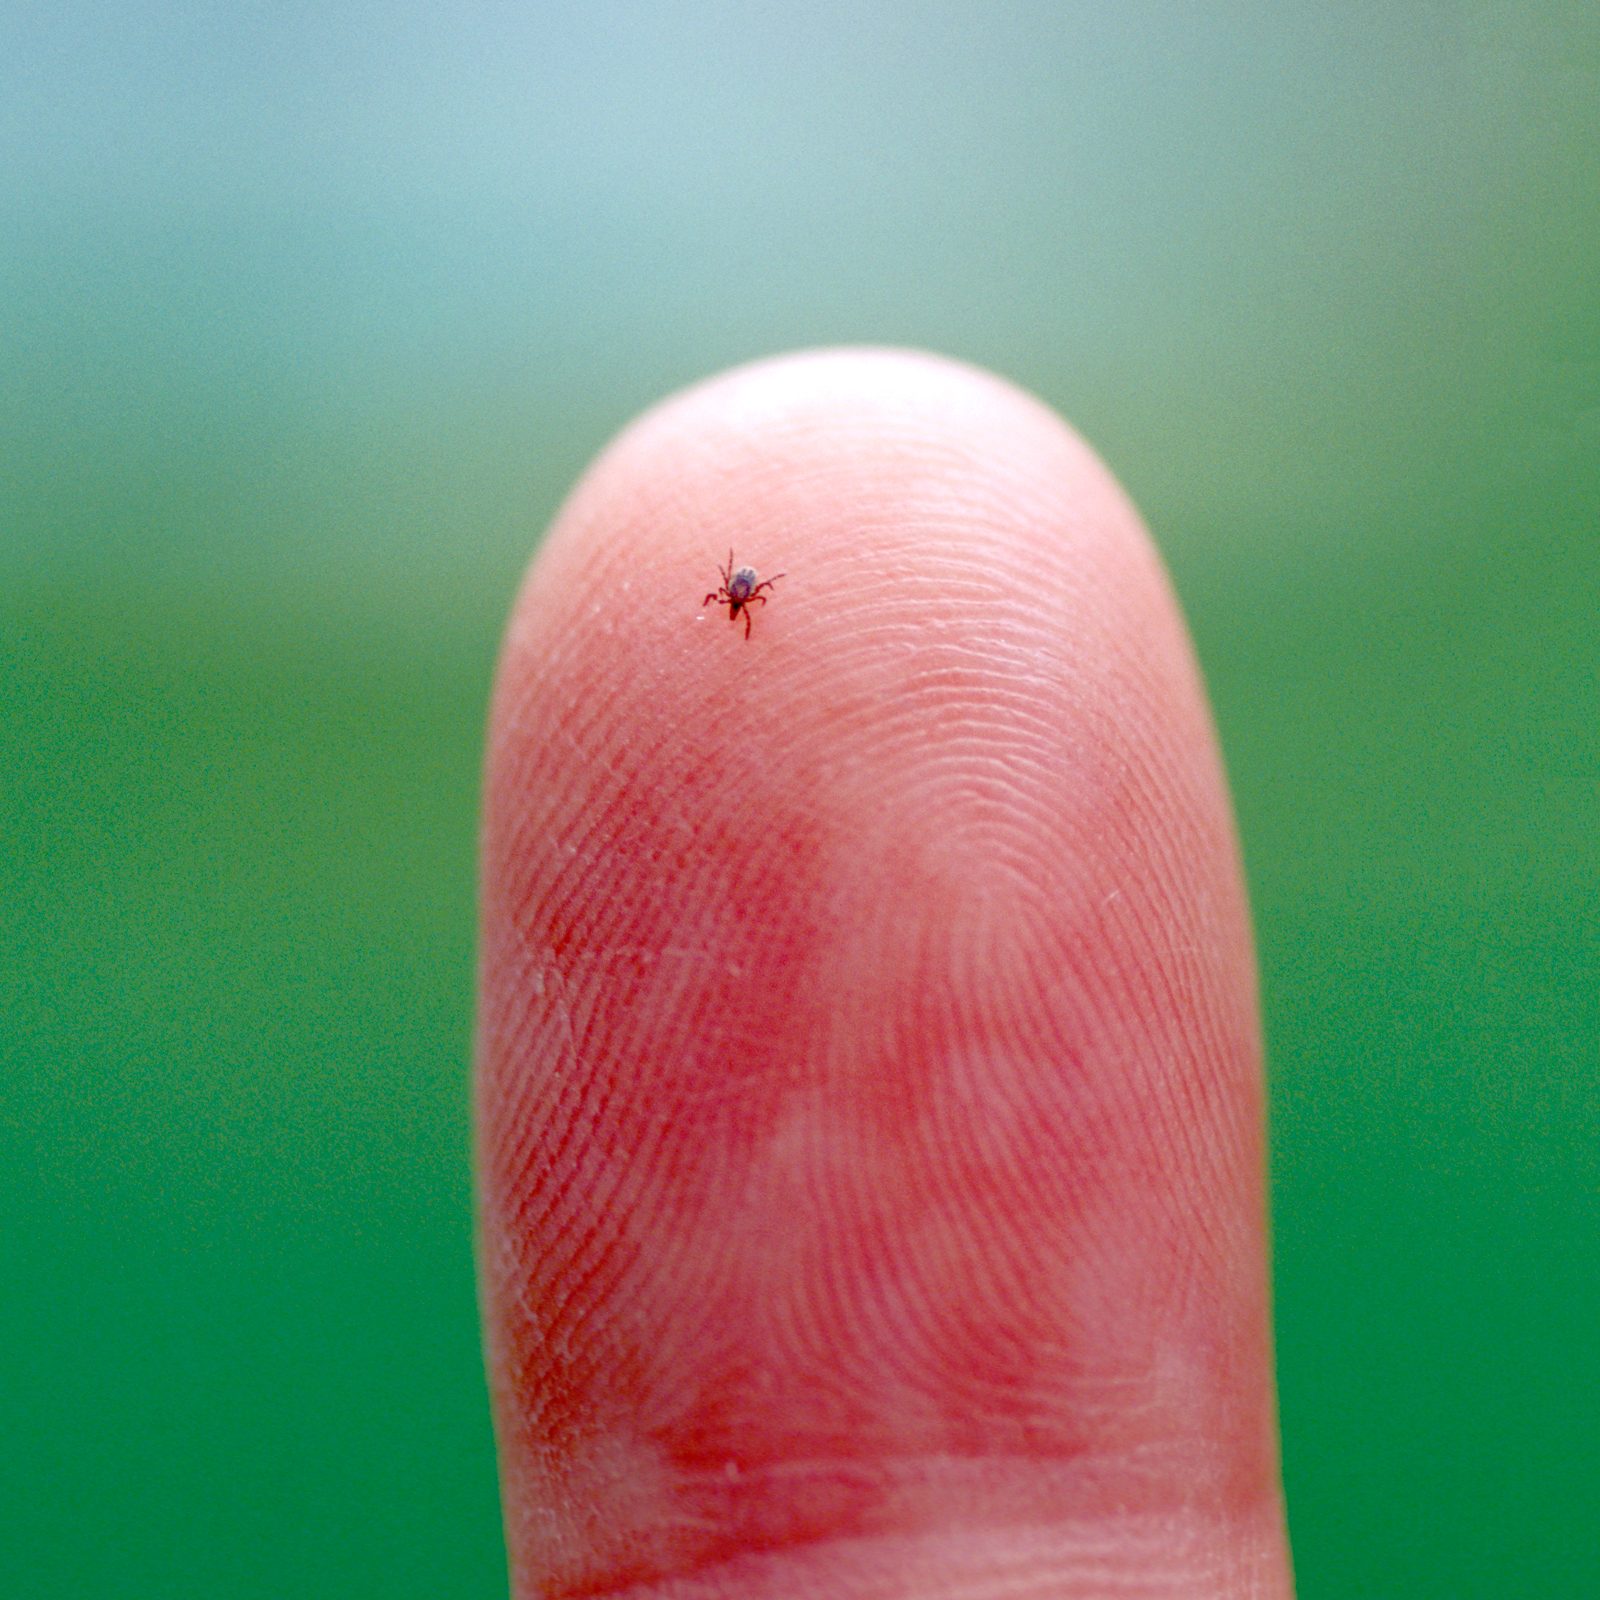 Here's Why There Are So Many Ticks This Summer, Say Experts The